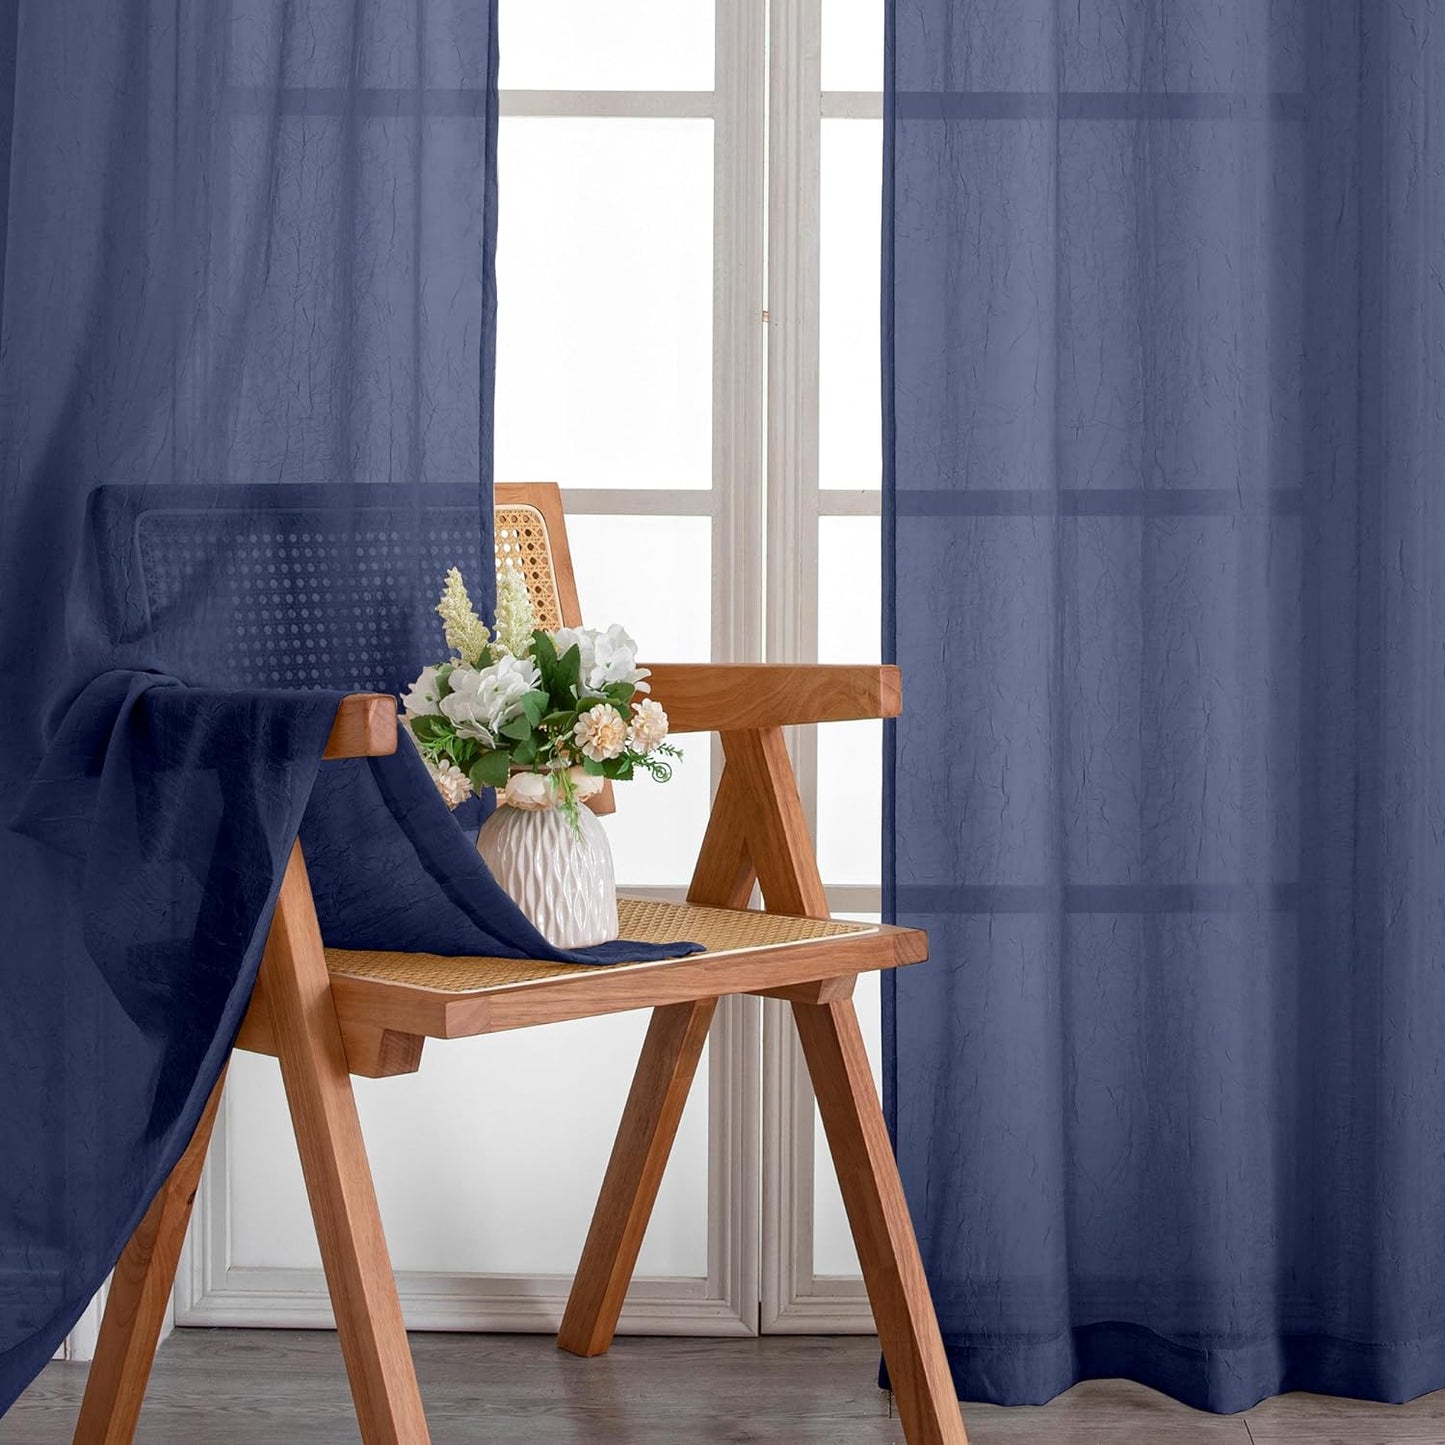 Crushed Sheer White Curtains 63 Inch Length 2 Panels, Light Filtering Solid Crinkle Voile Short Sheer Curtian for Bedroom Living Room, Each 42Wx63L Inches  Chyhomenyc Navy Blue 42 W X 72 L 